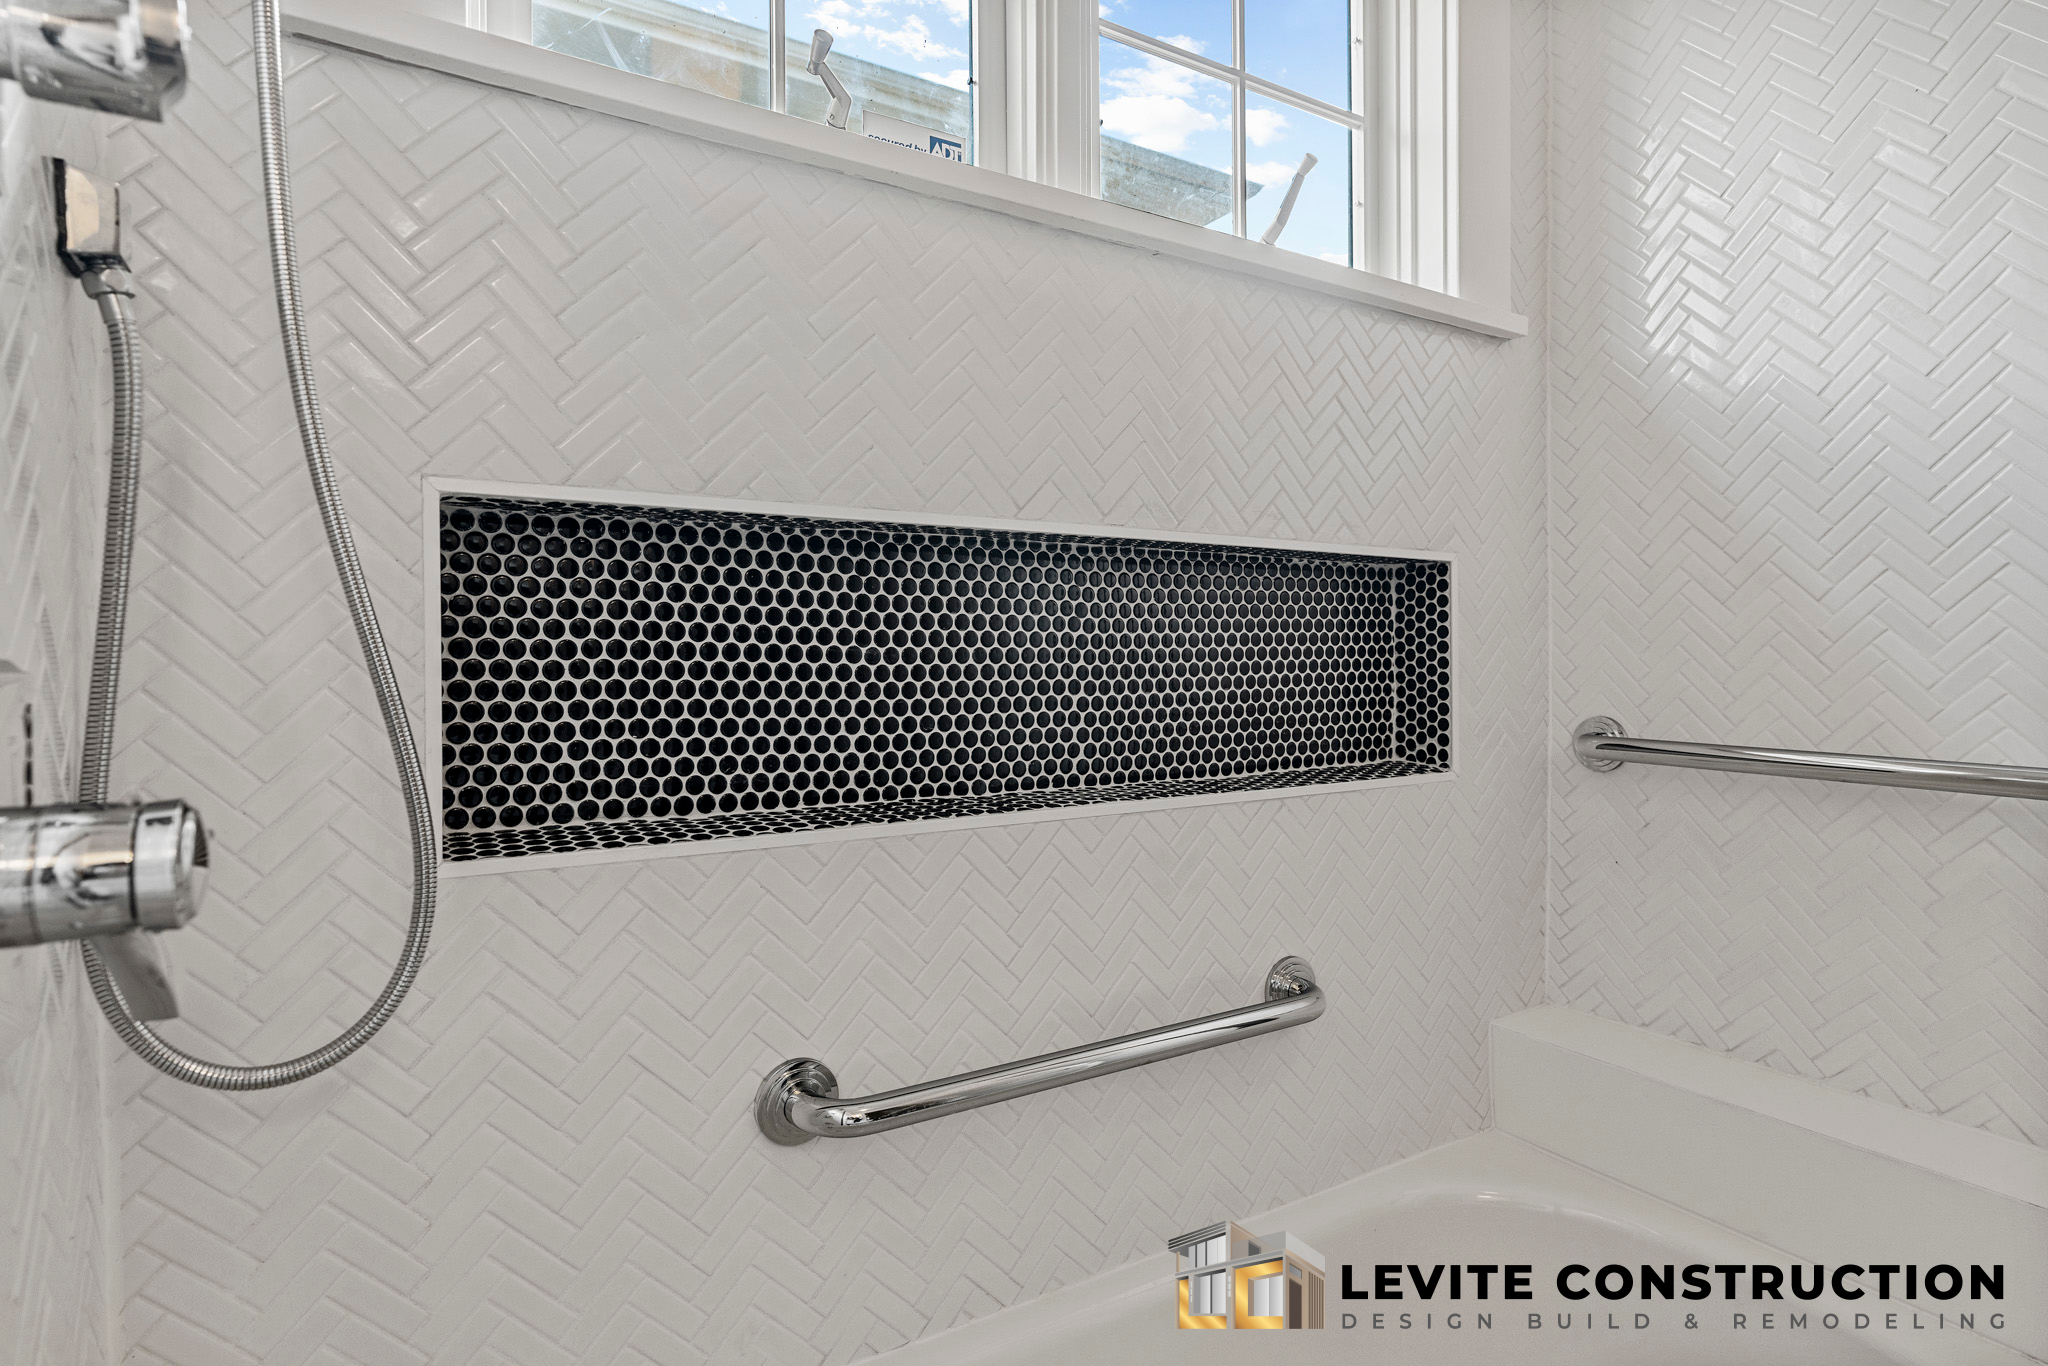 Seattle General Contractor Bathroom Remodeling Experts - Levite Construction Co.